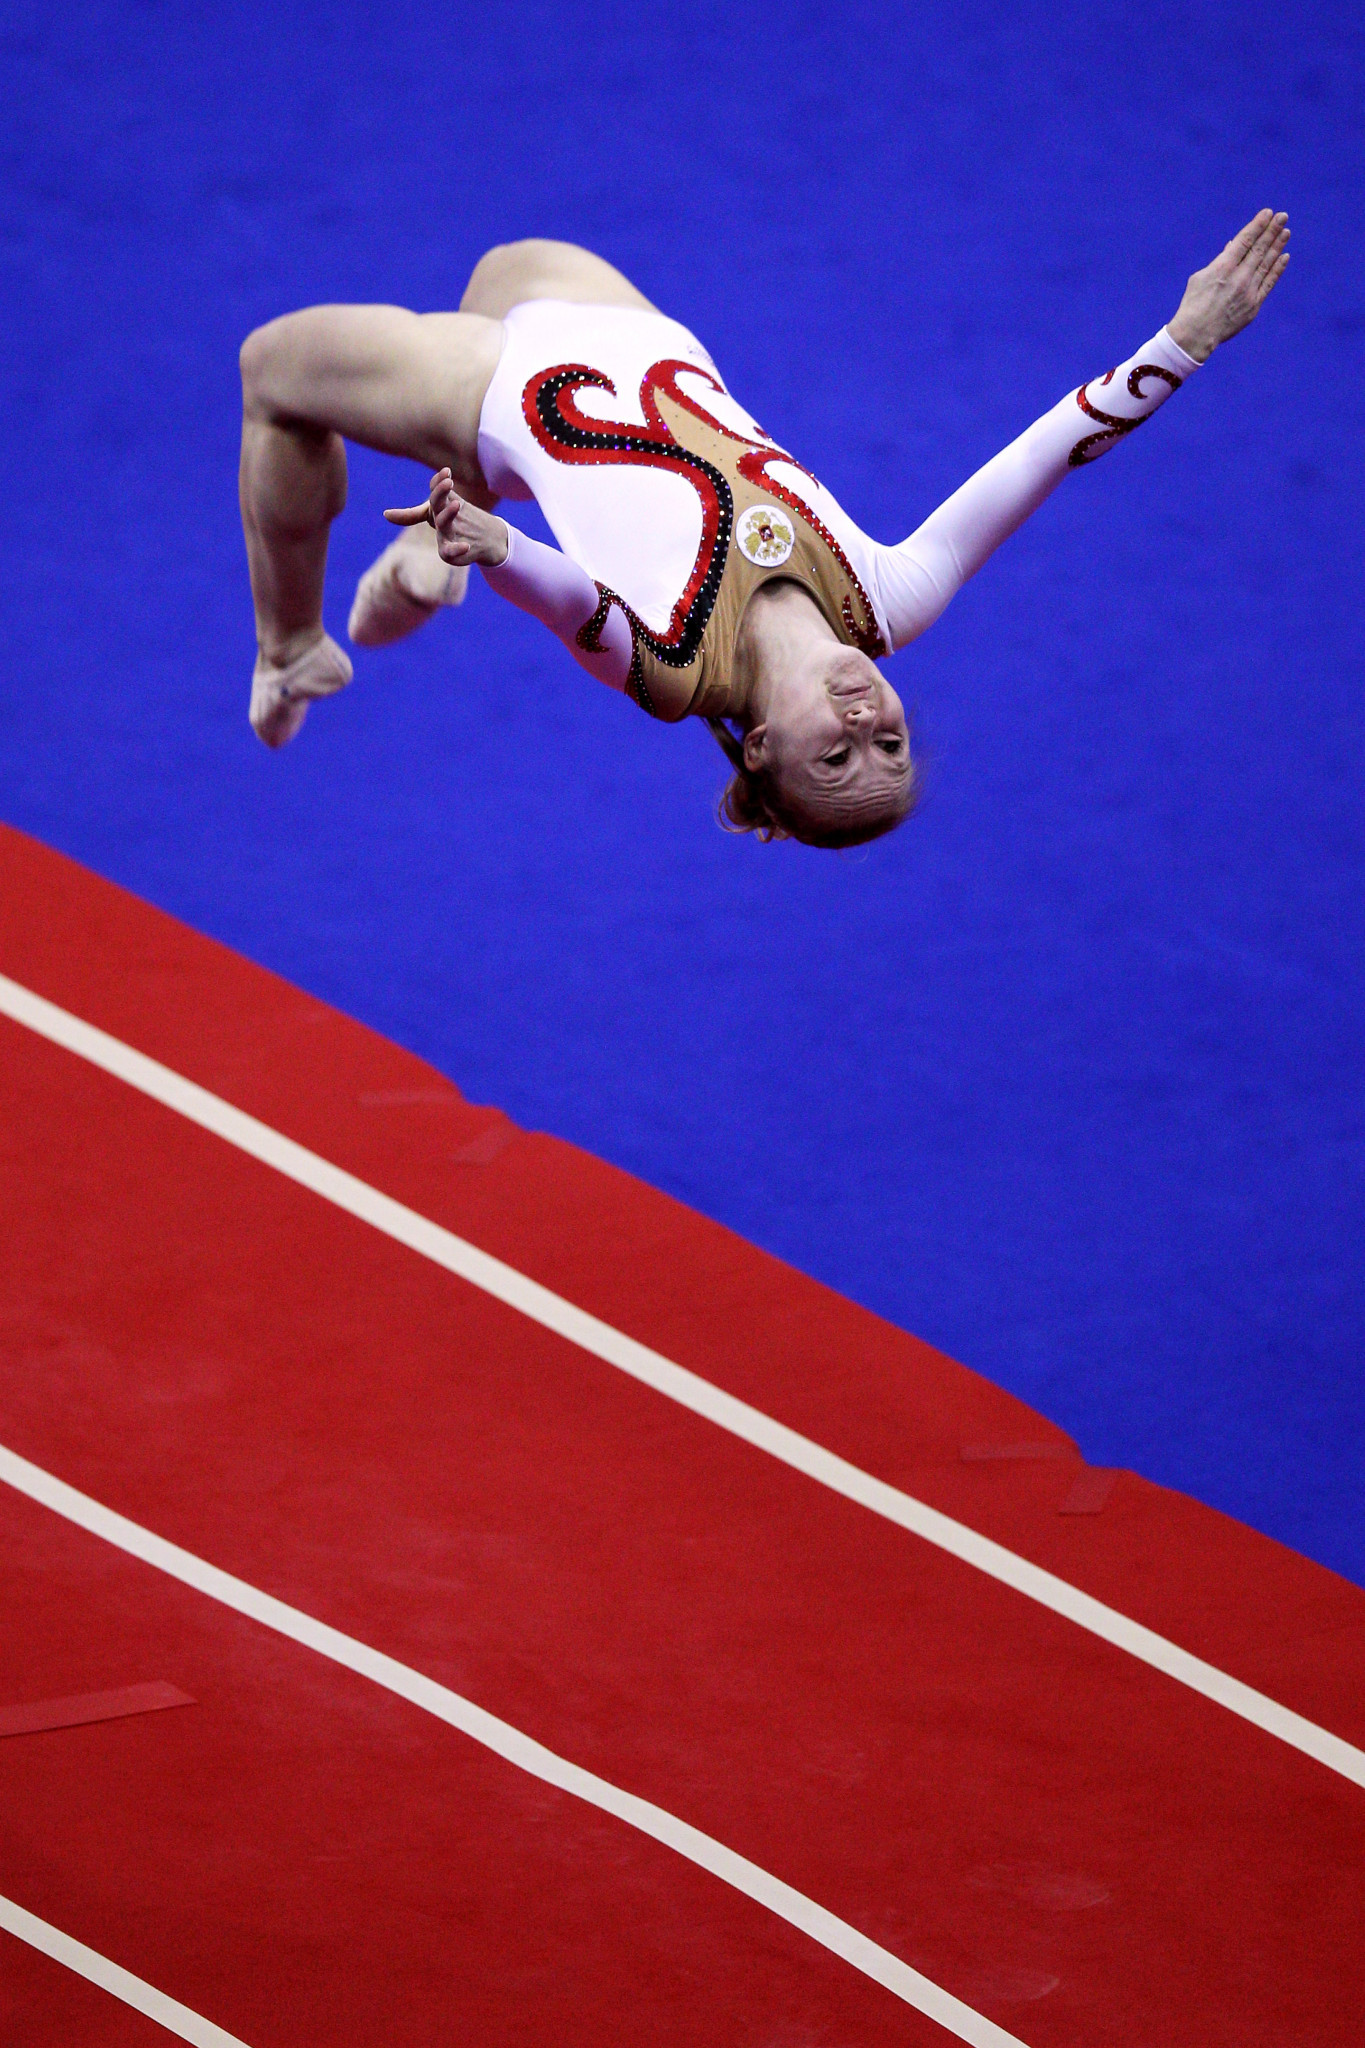 Anna Korobeynikova, who took her first world tumbling title with the Russian team back in 1998, will aim to defend her European title in Baku this weekend ©Getty Images